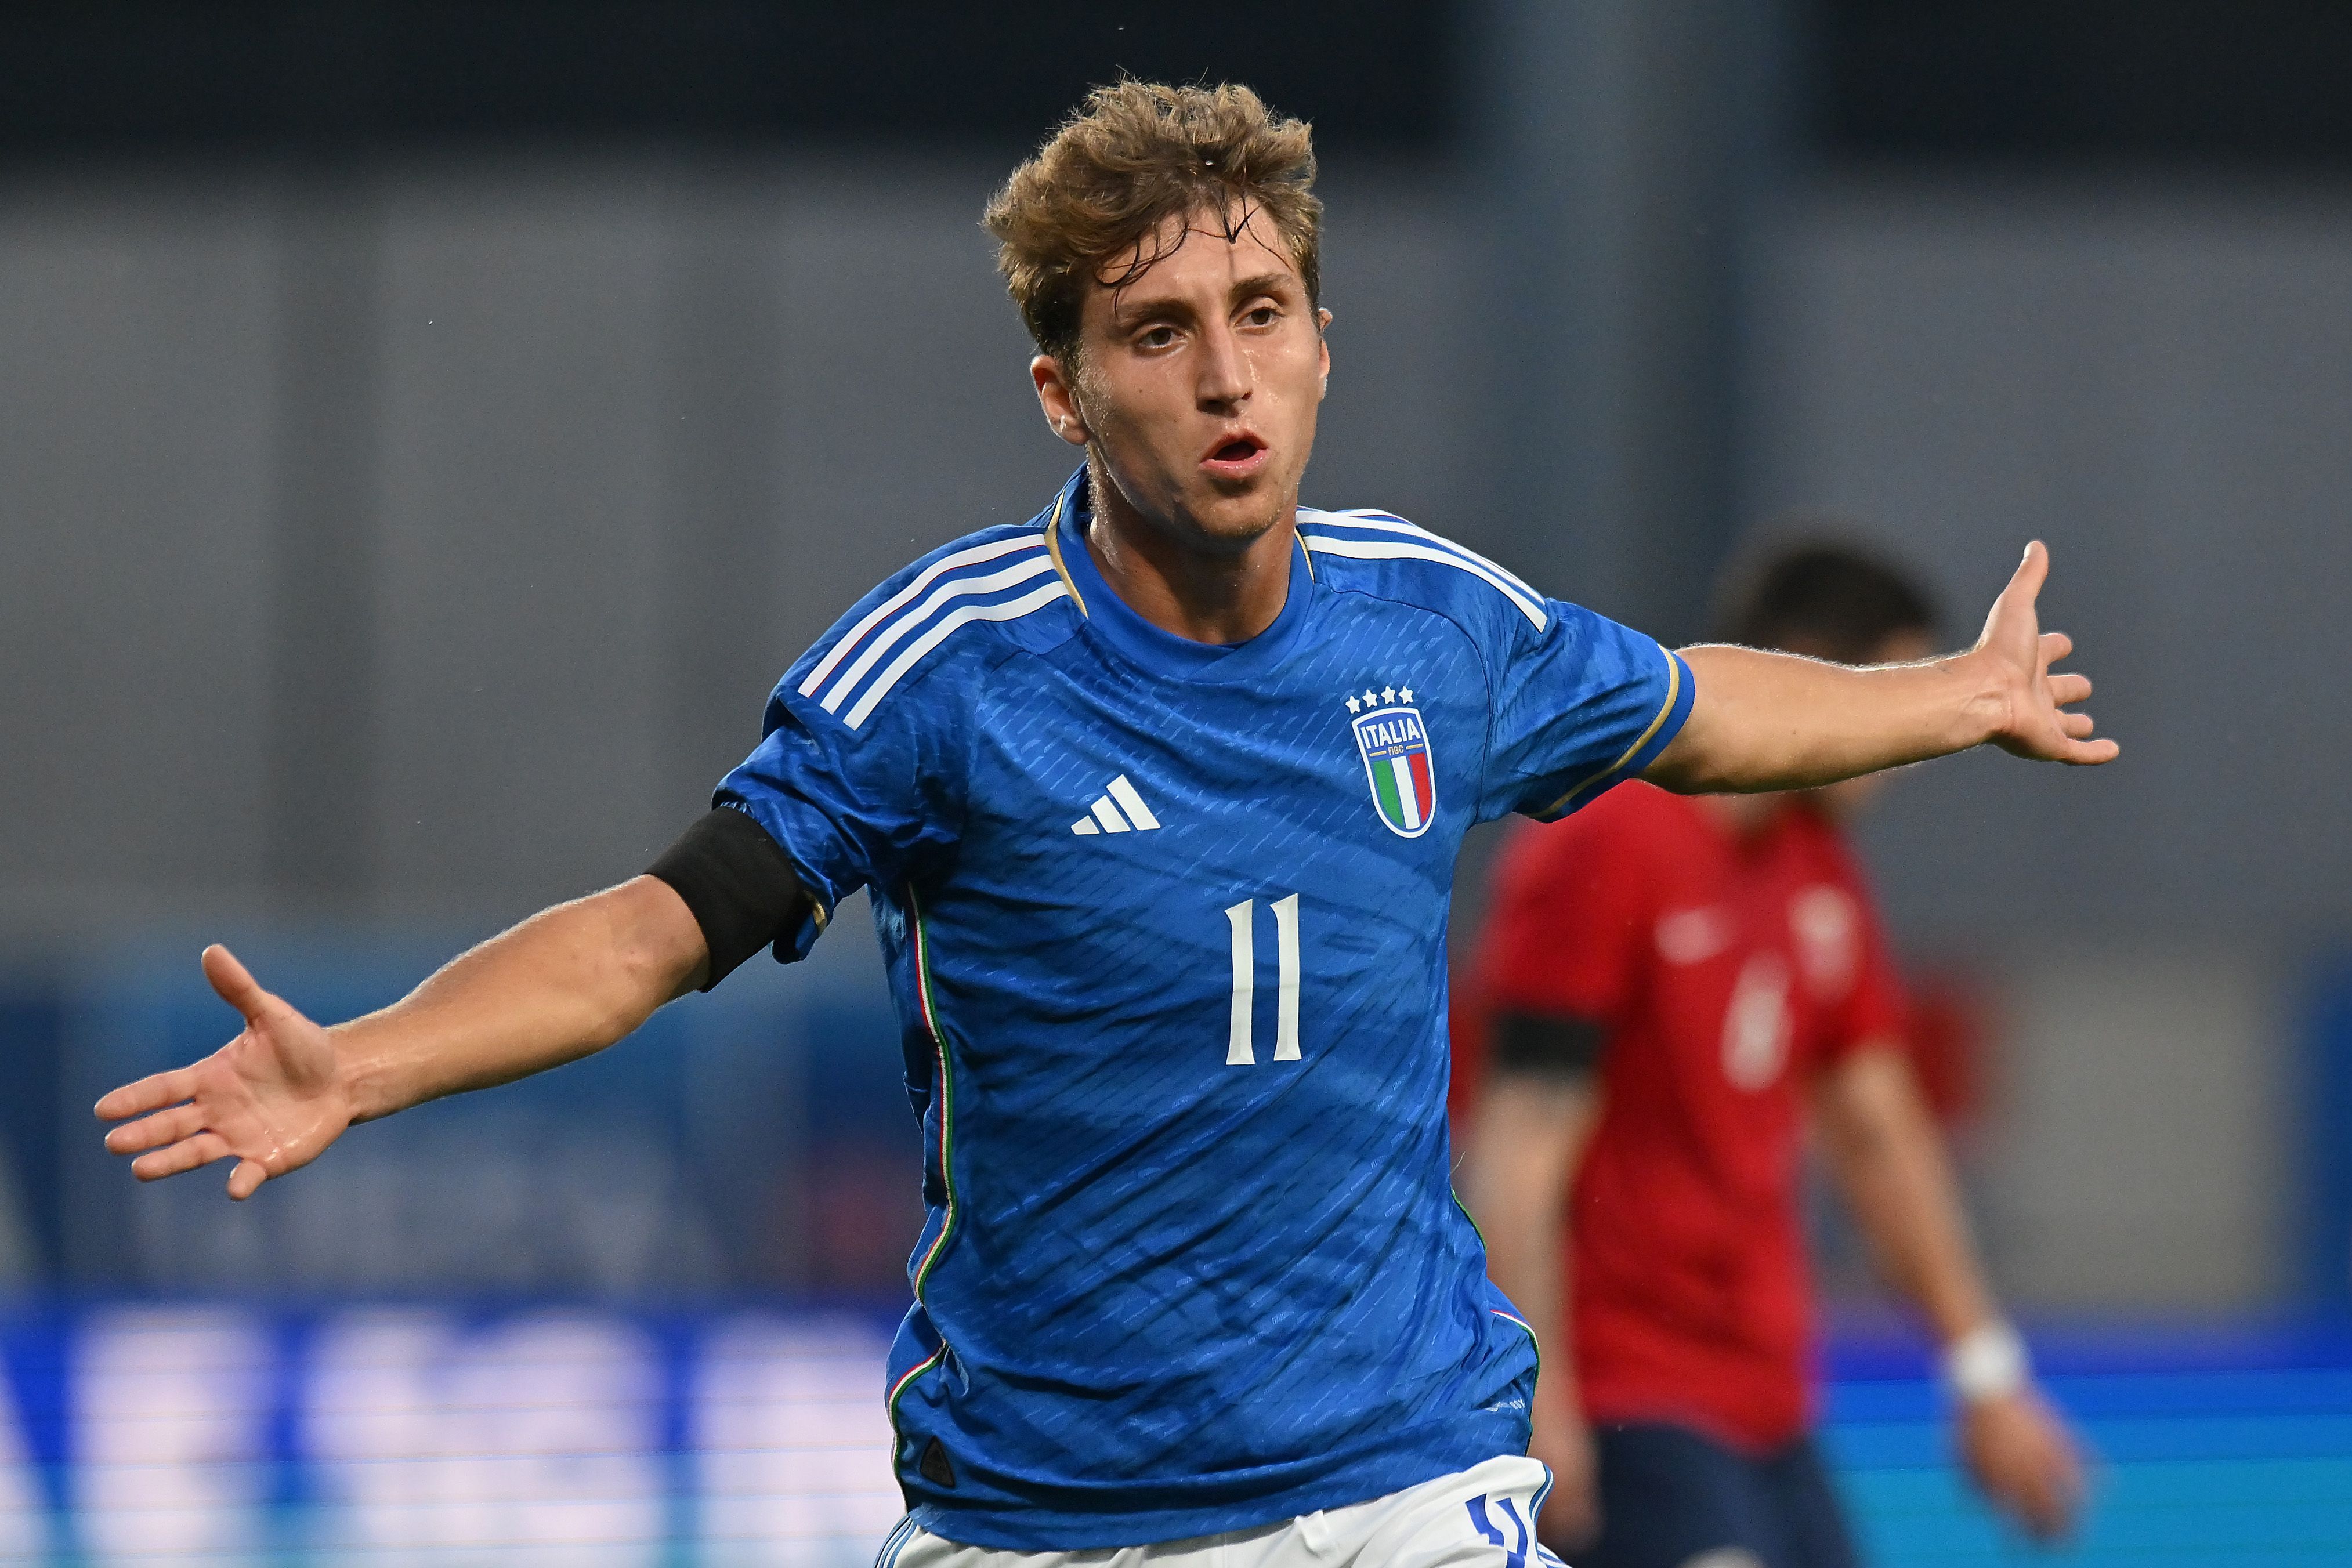 FIGC wants Serie A and Serie B players to get vaccinated